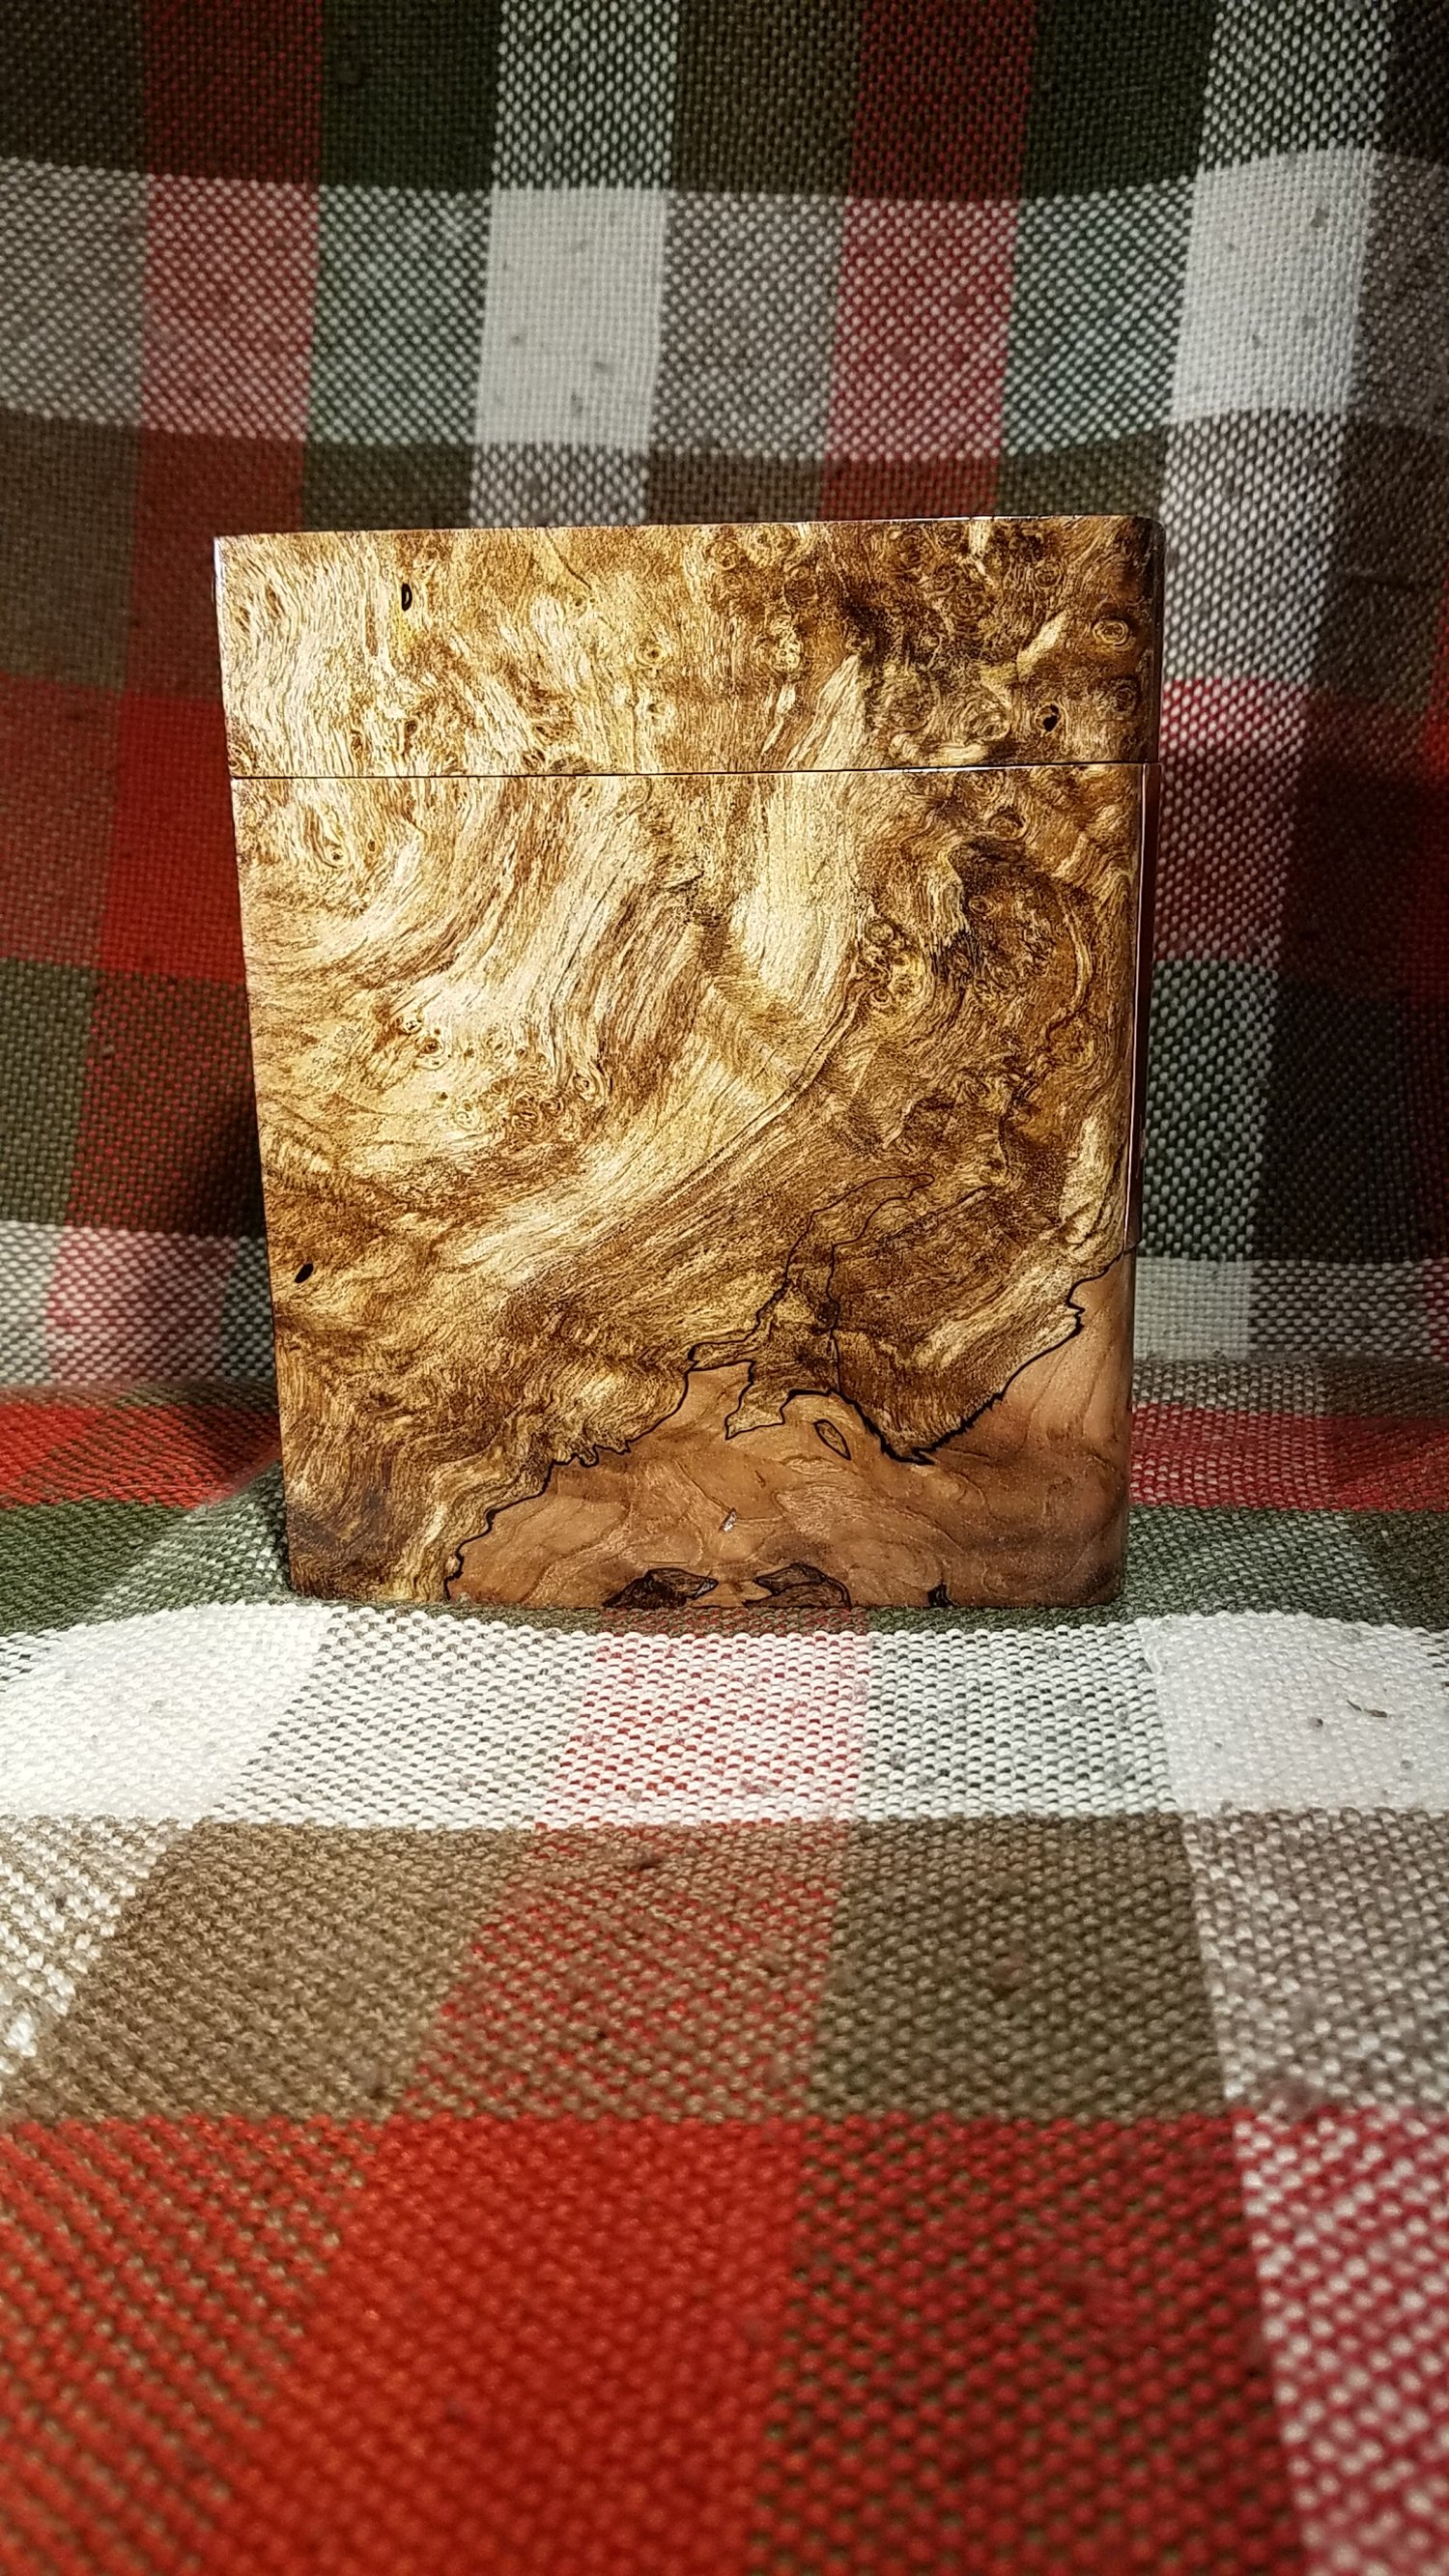  Book shaped Funeral Urn, Spalted Maple Burl, stabalized, engraved copper information plates, back view. 